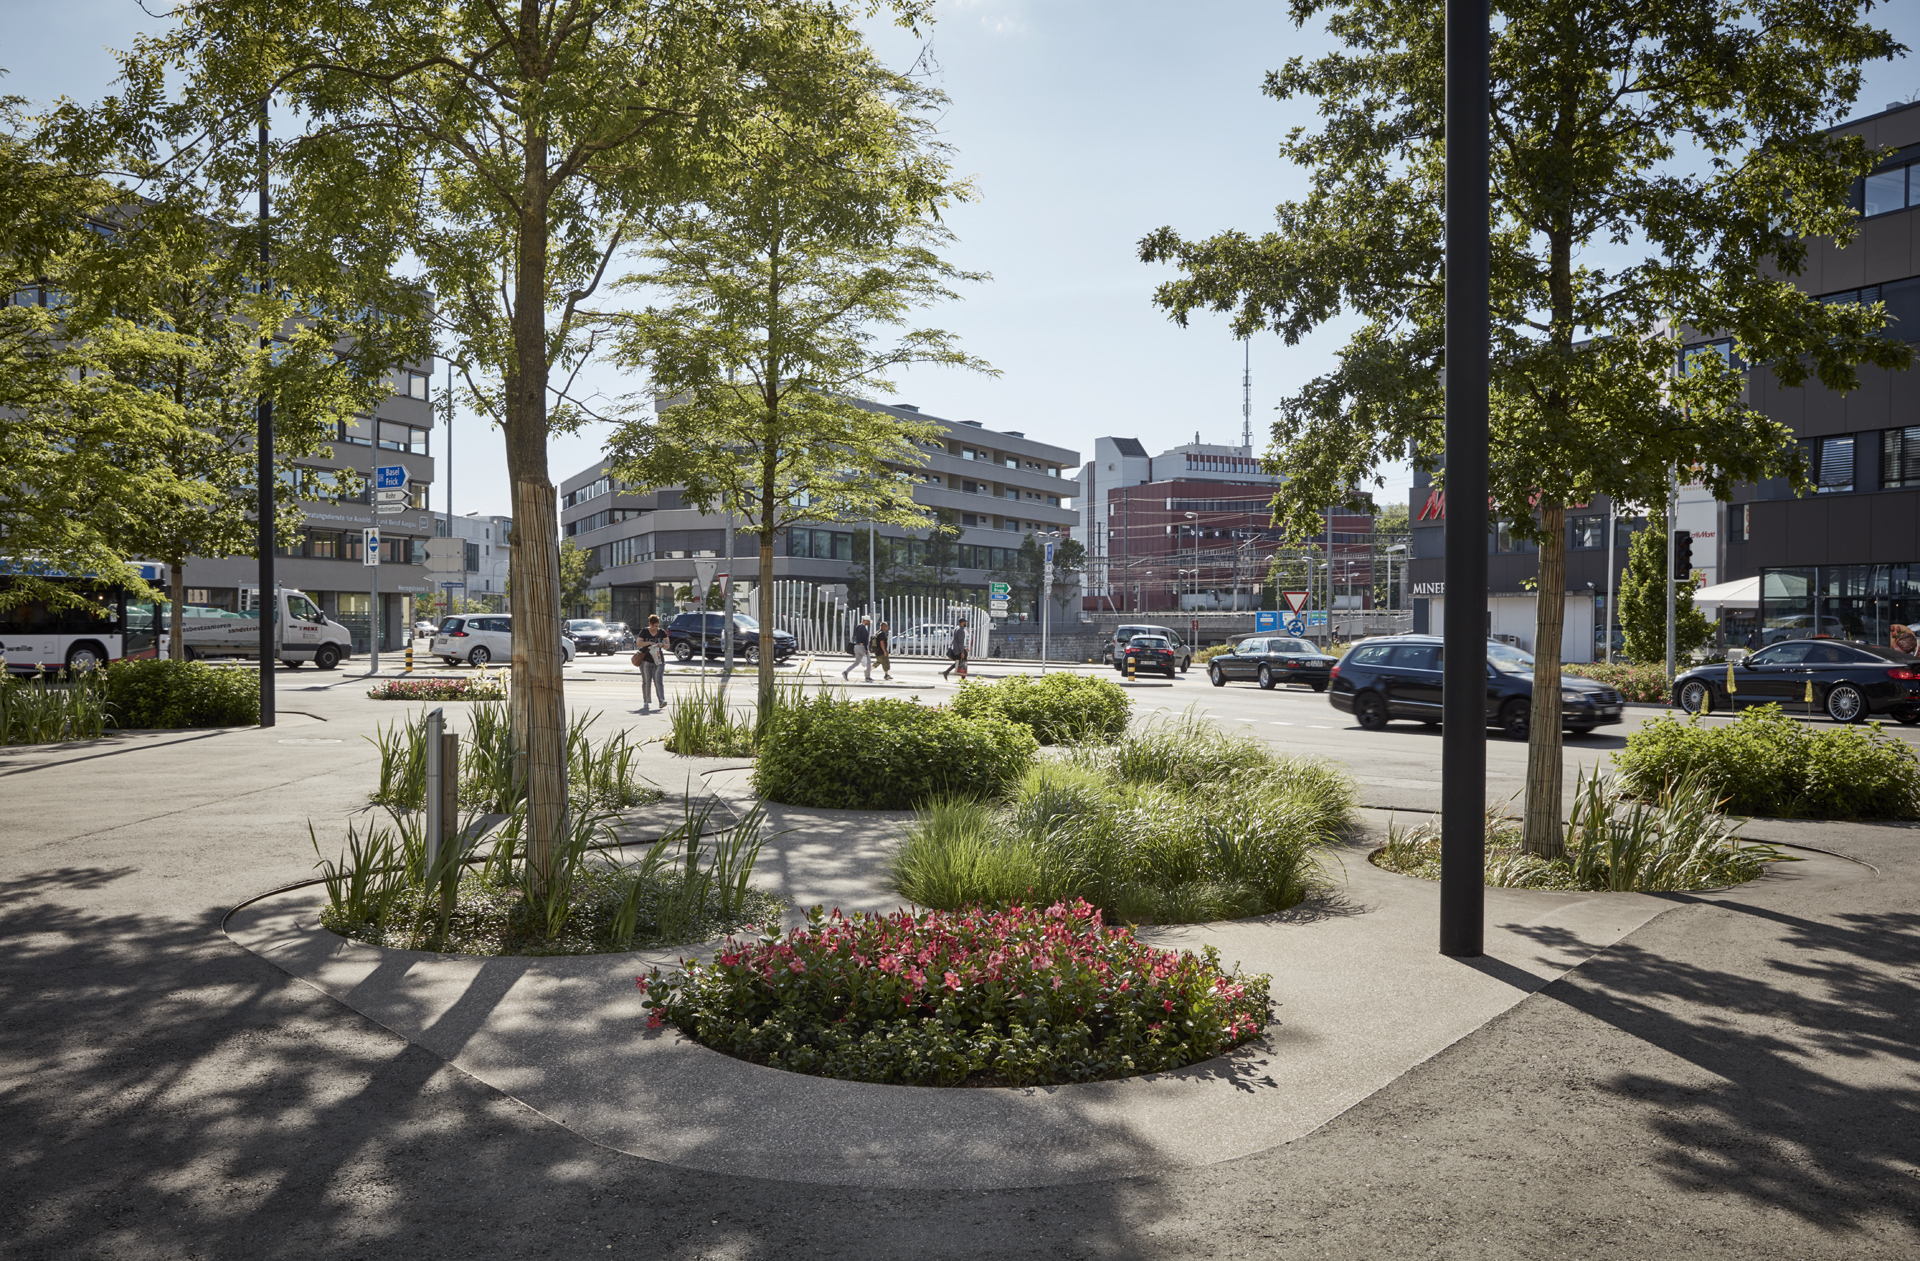 A tree filter leads from the traffic area of the Gaisplatz to the neighbourhood